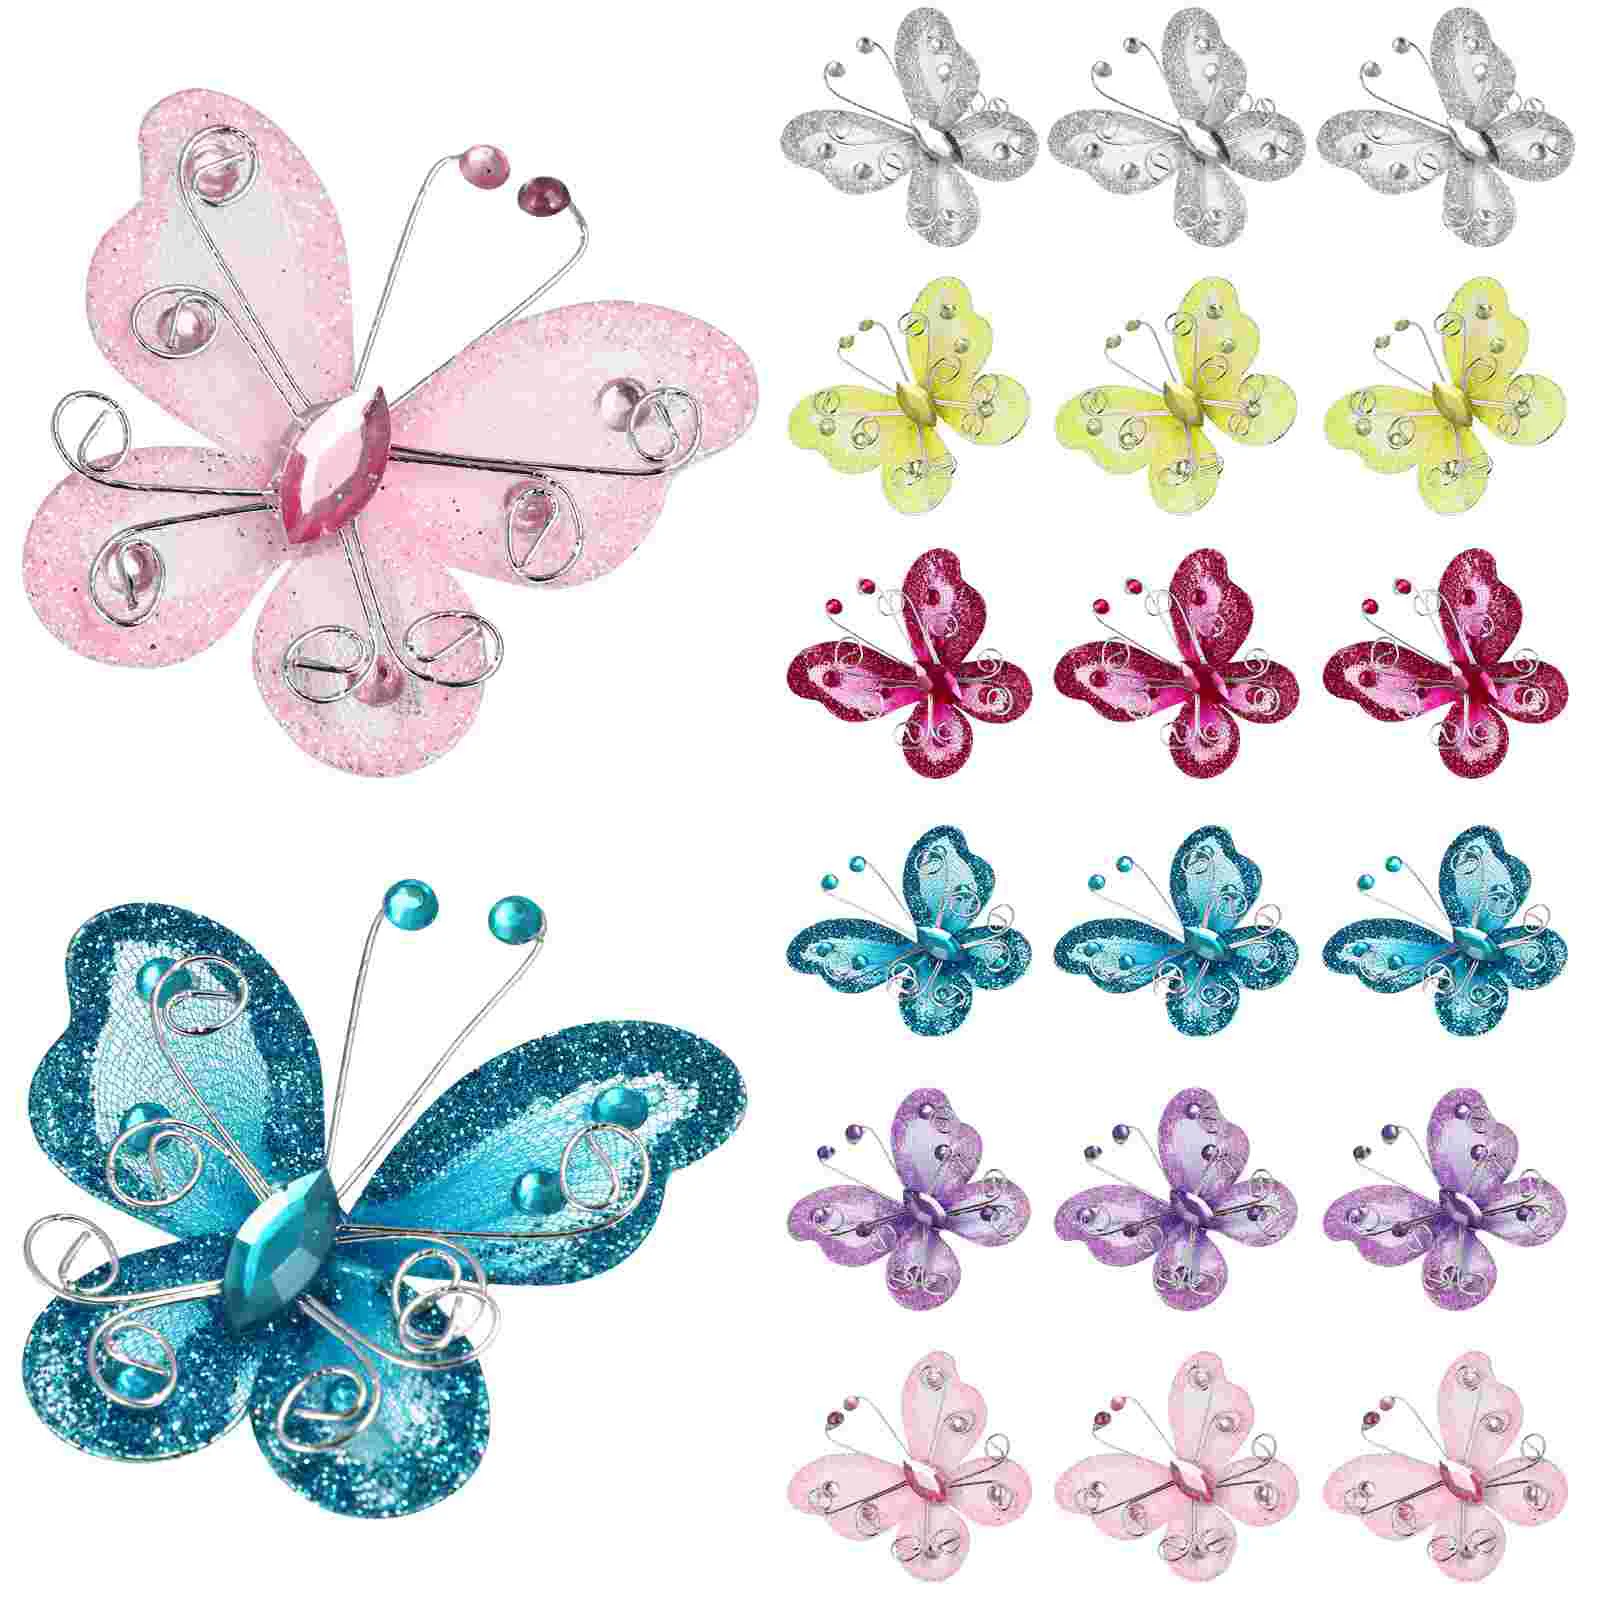 

36 Pcs Organza Butterflies Decor Butterfly Centerpieces For Crafts Wire Flash Ornament Fabric Appliques